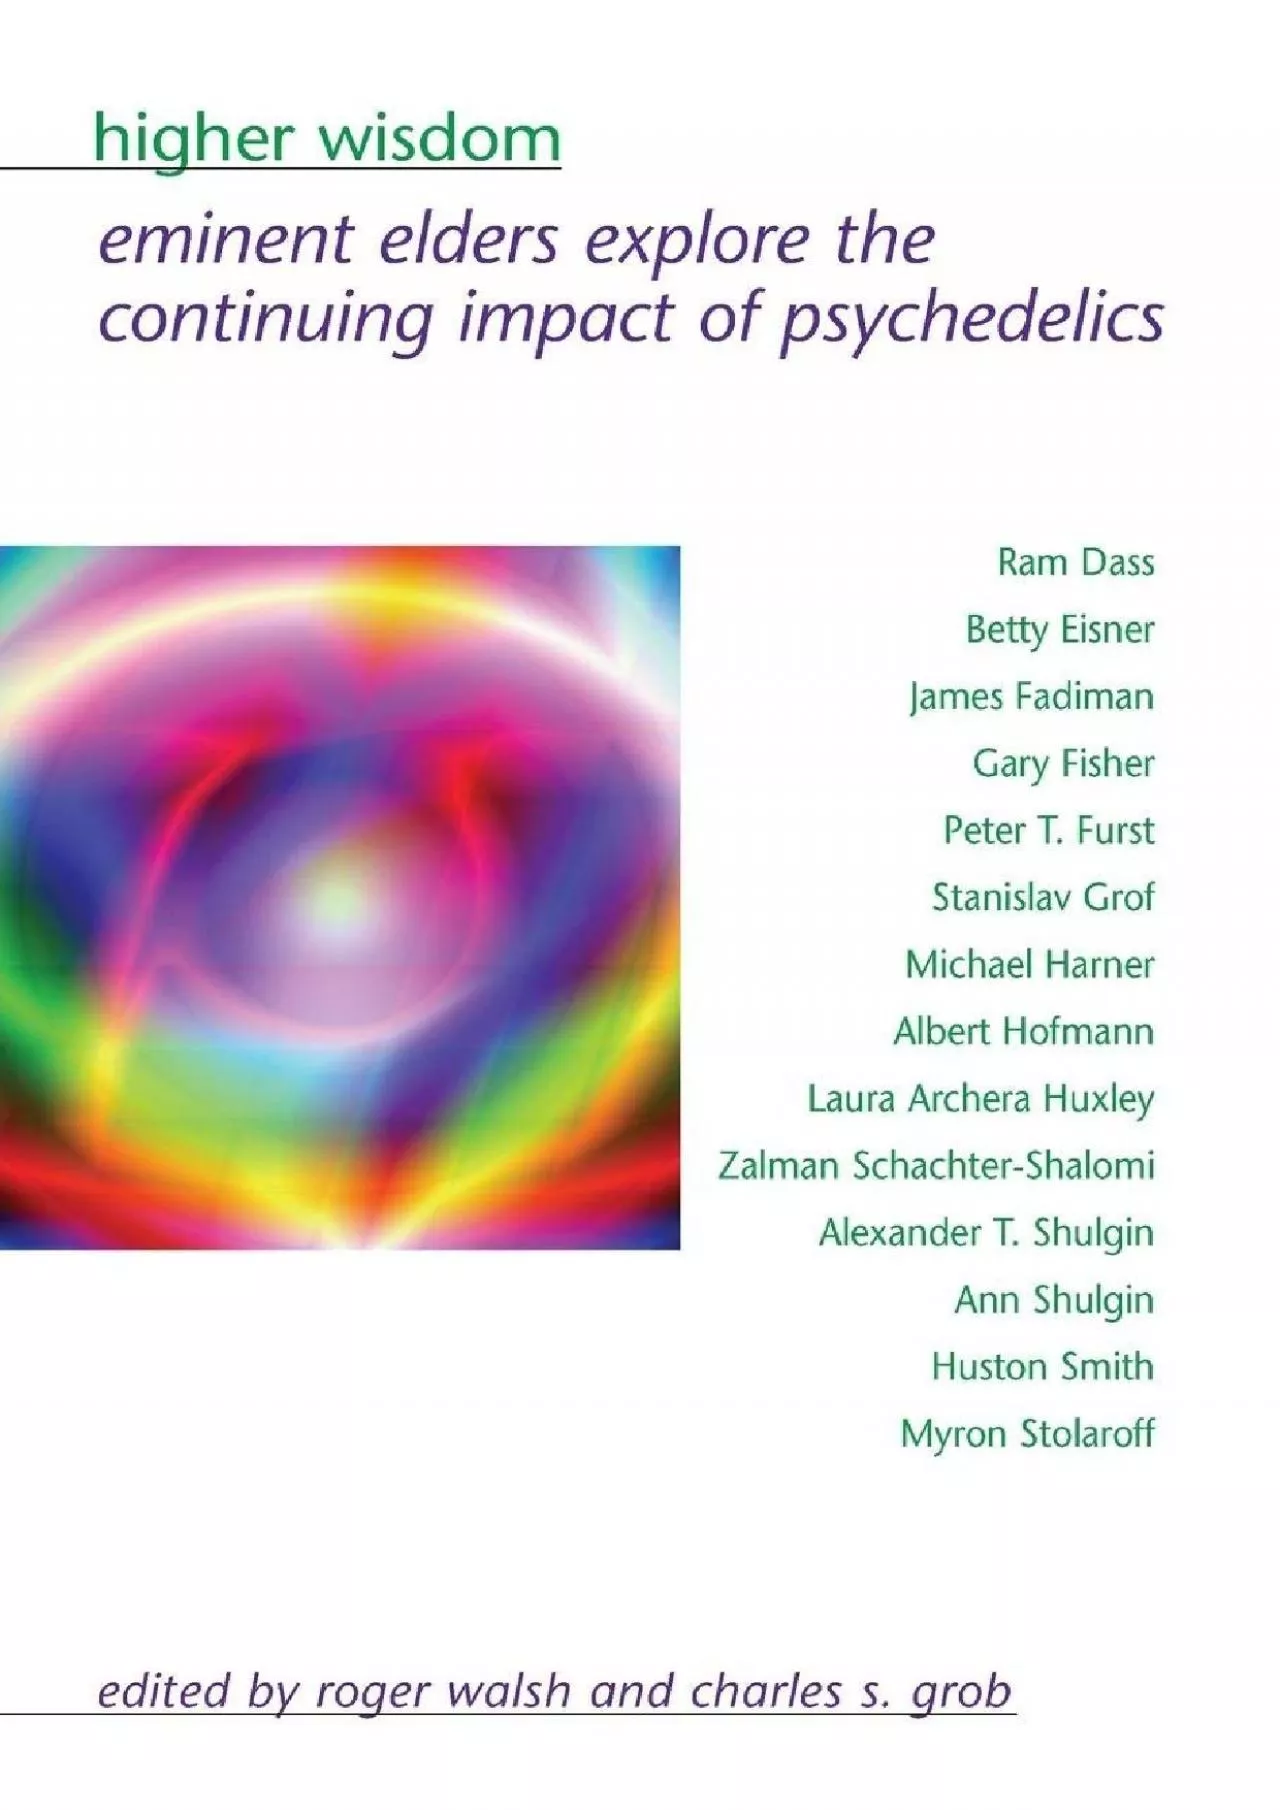 (BOOK)-Higher Wisdom: Eminent Elders Explore the Continuing Impact of Psychedelics (Suny